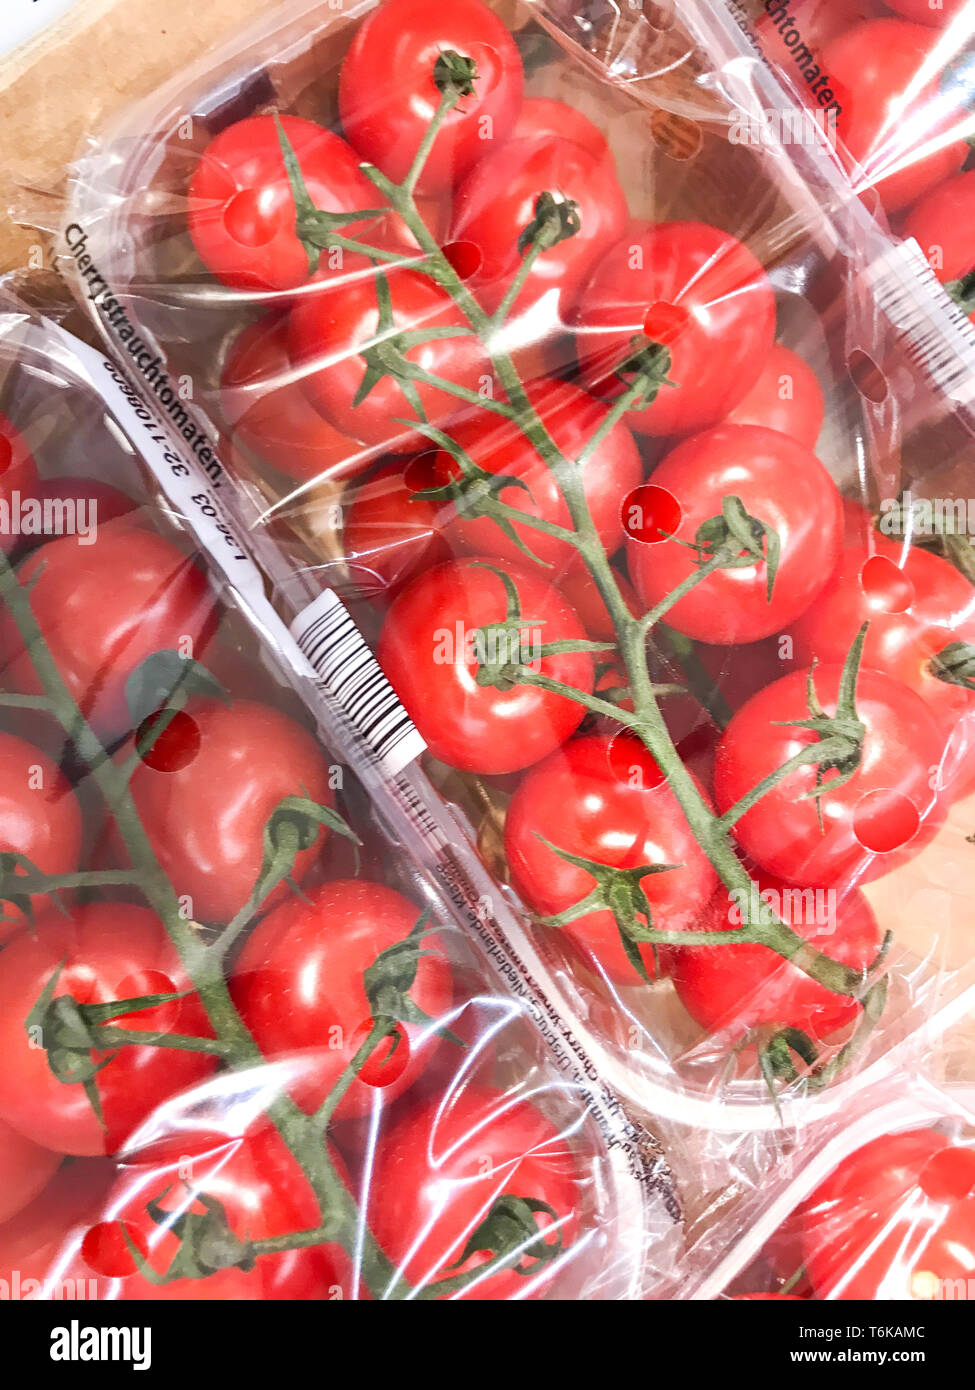 - in cherry tomatoes supermarket Photo Stock Alamy the Red